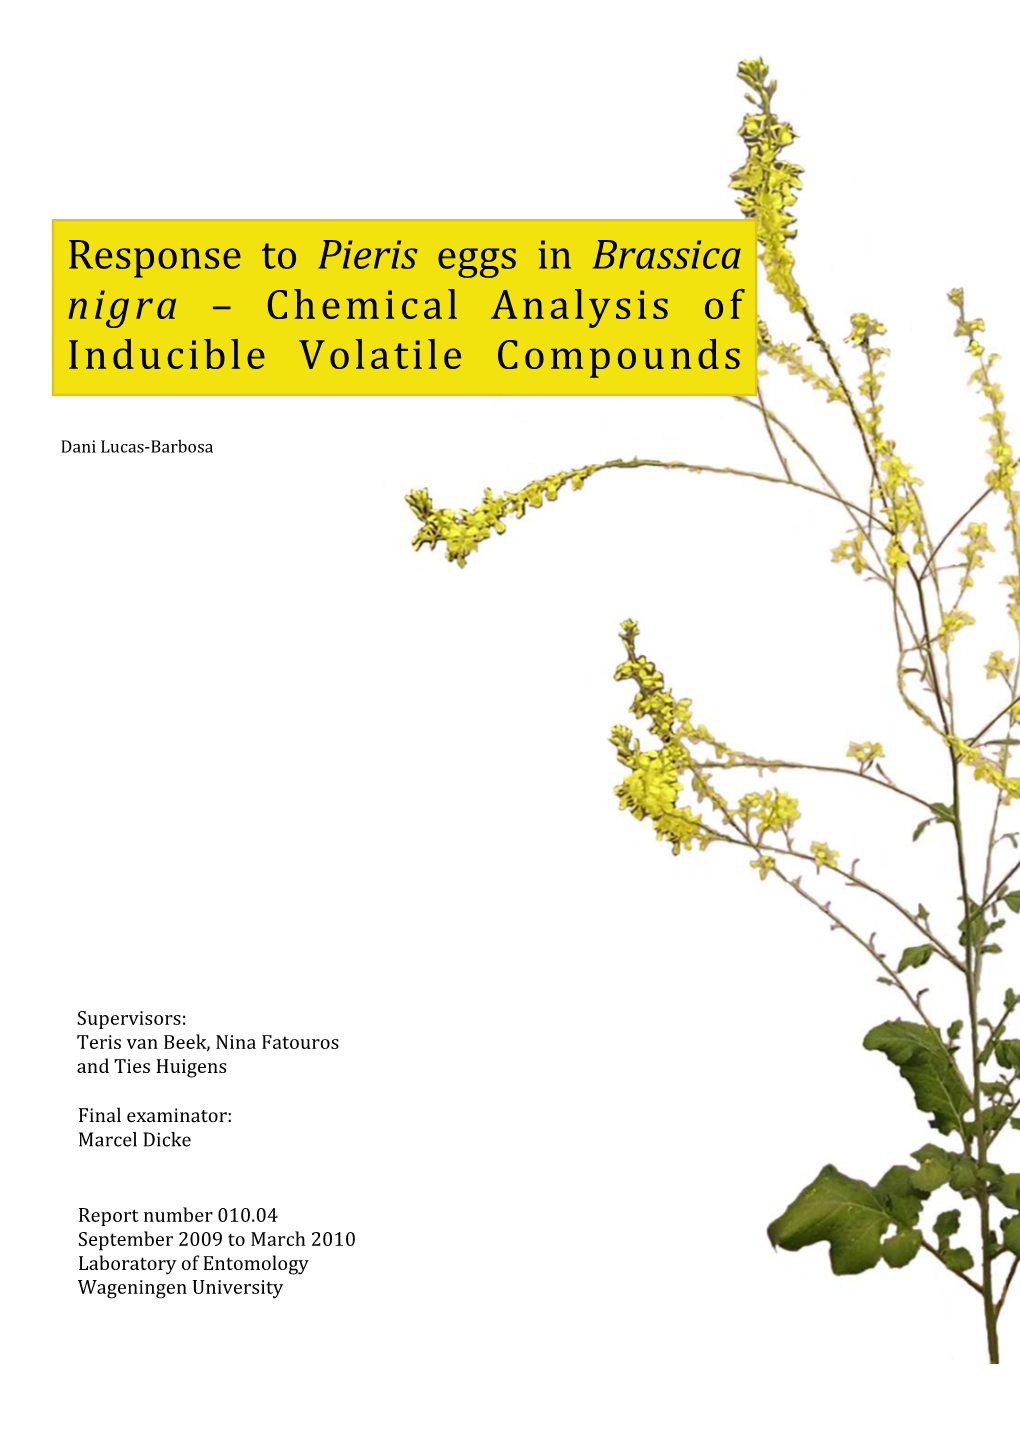 Response to Pieris Eggs in Brassica Nigra – Chemical Analysis of Inducible Volatile Compounds